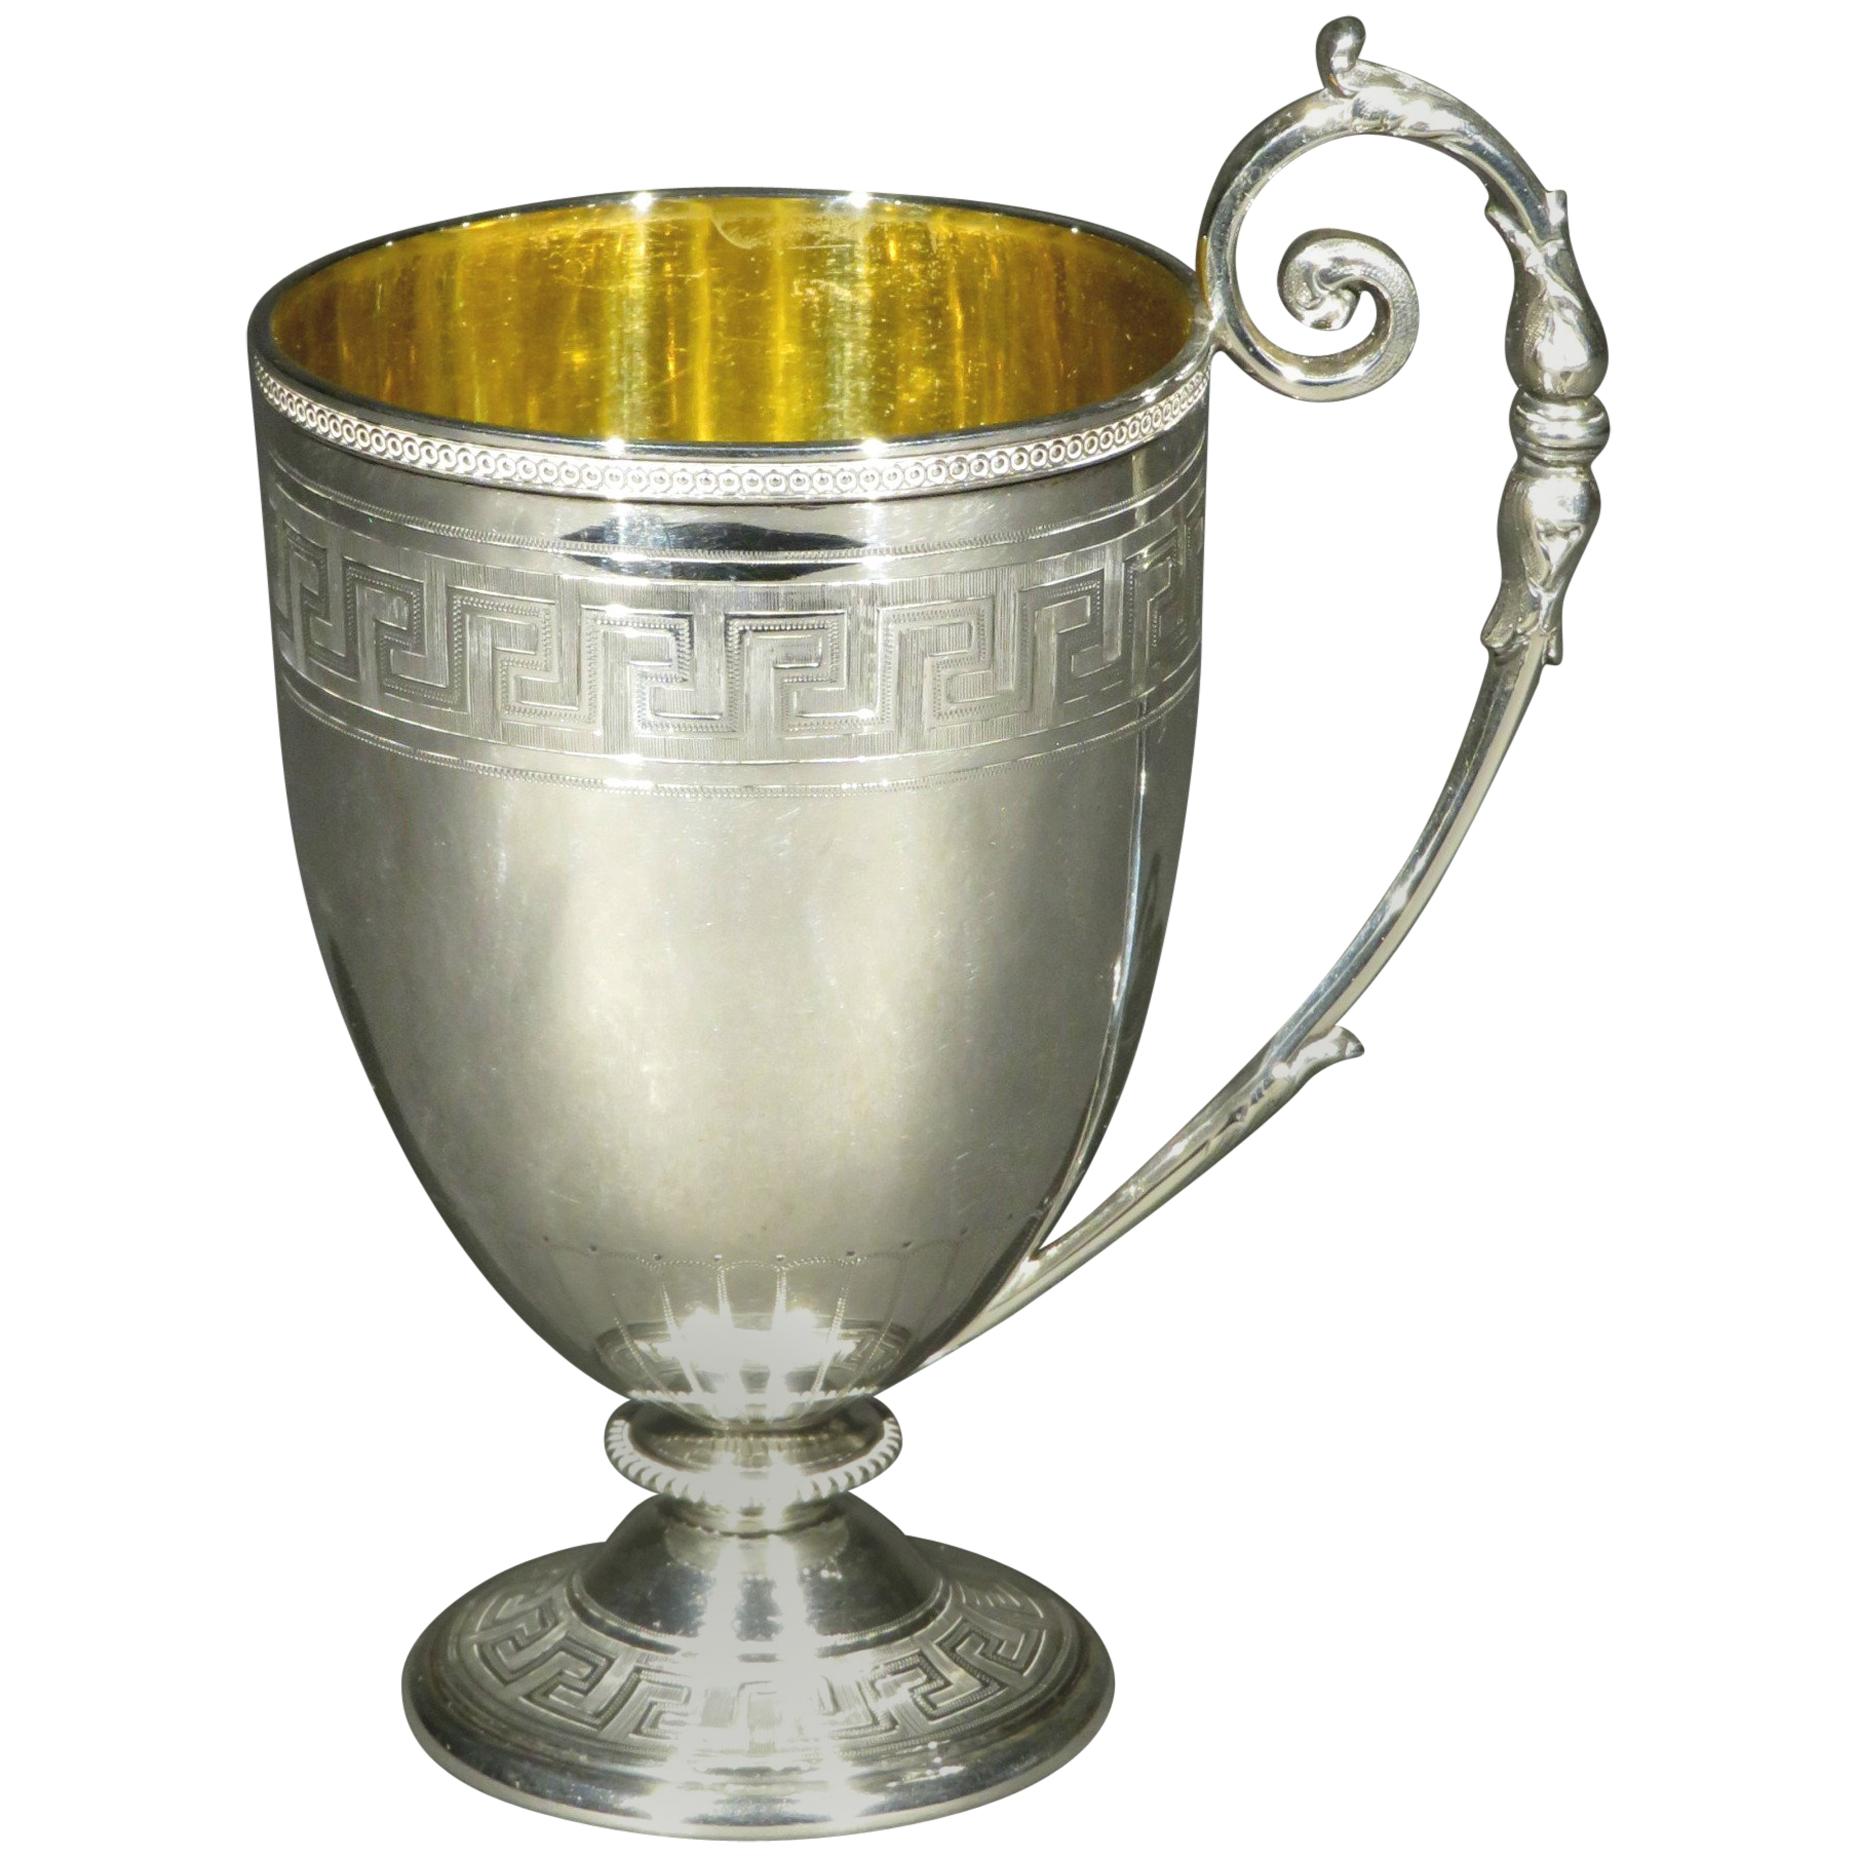 Very Fine 19th Century Sterling Silver Christening Cup by Edward & James Barnard